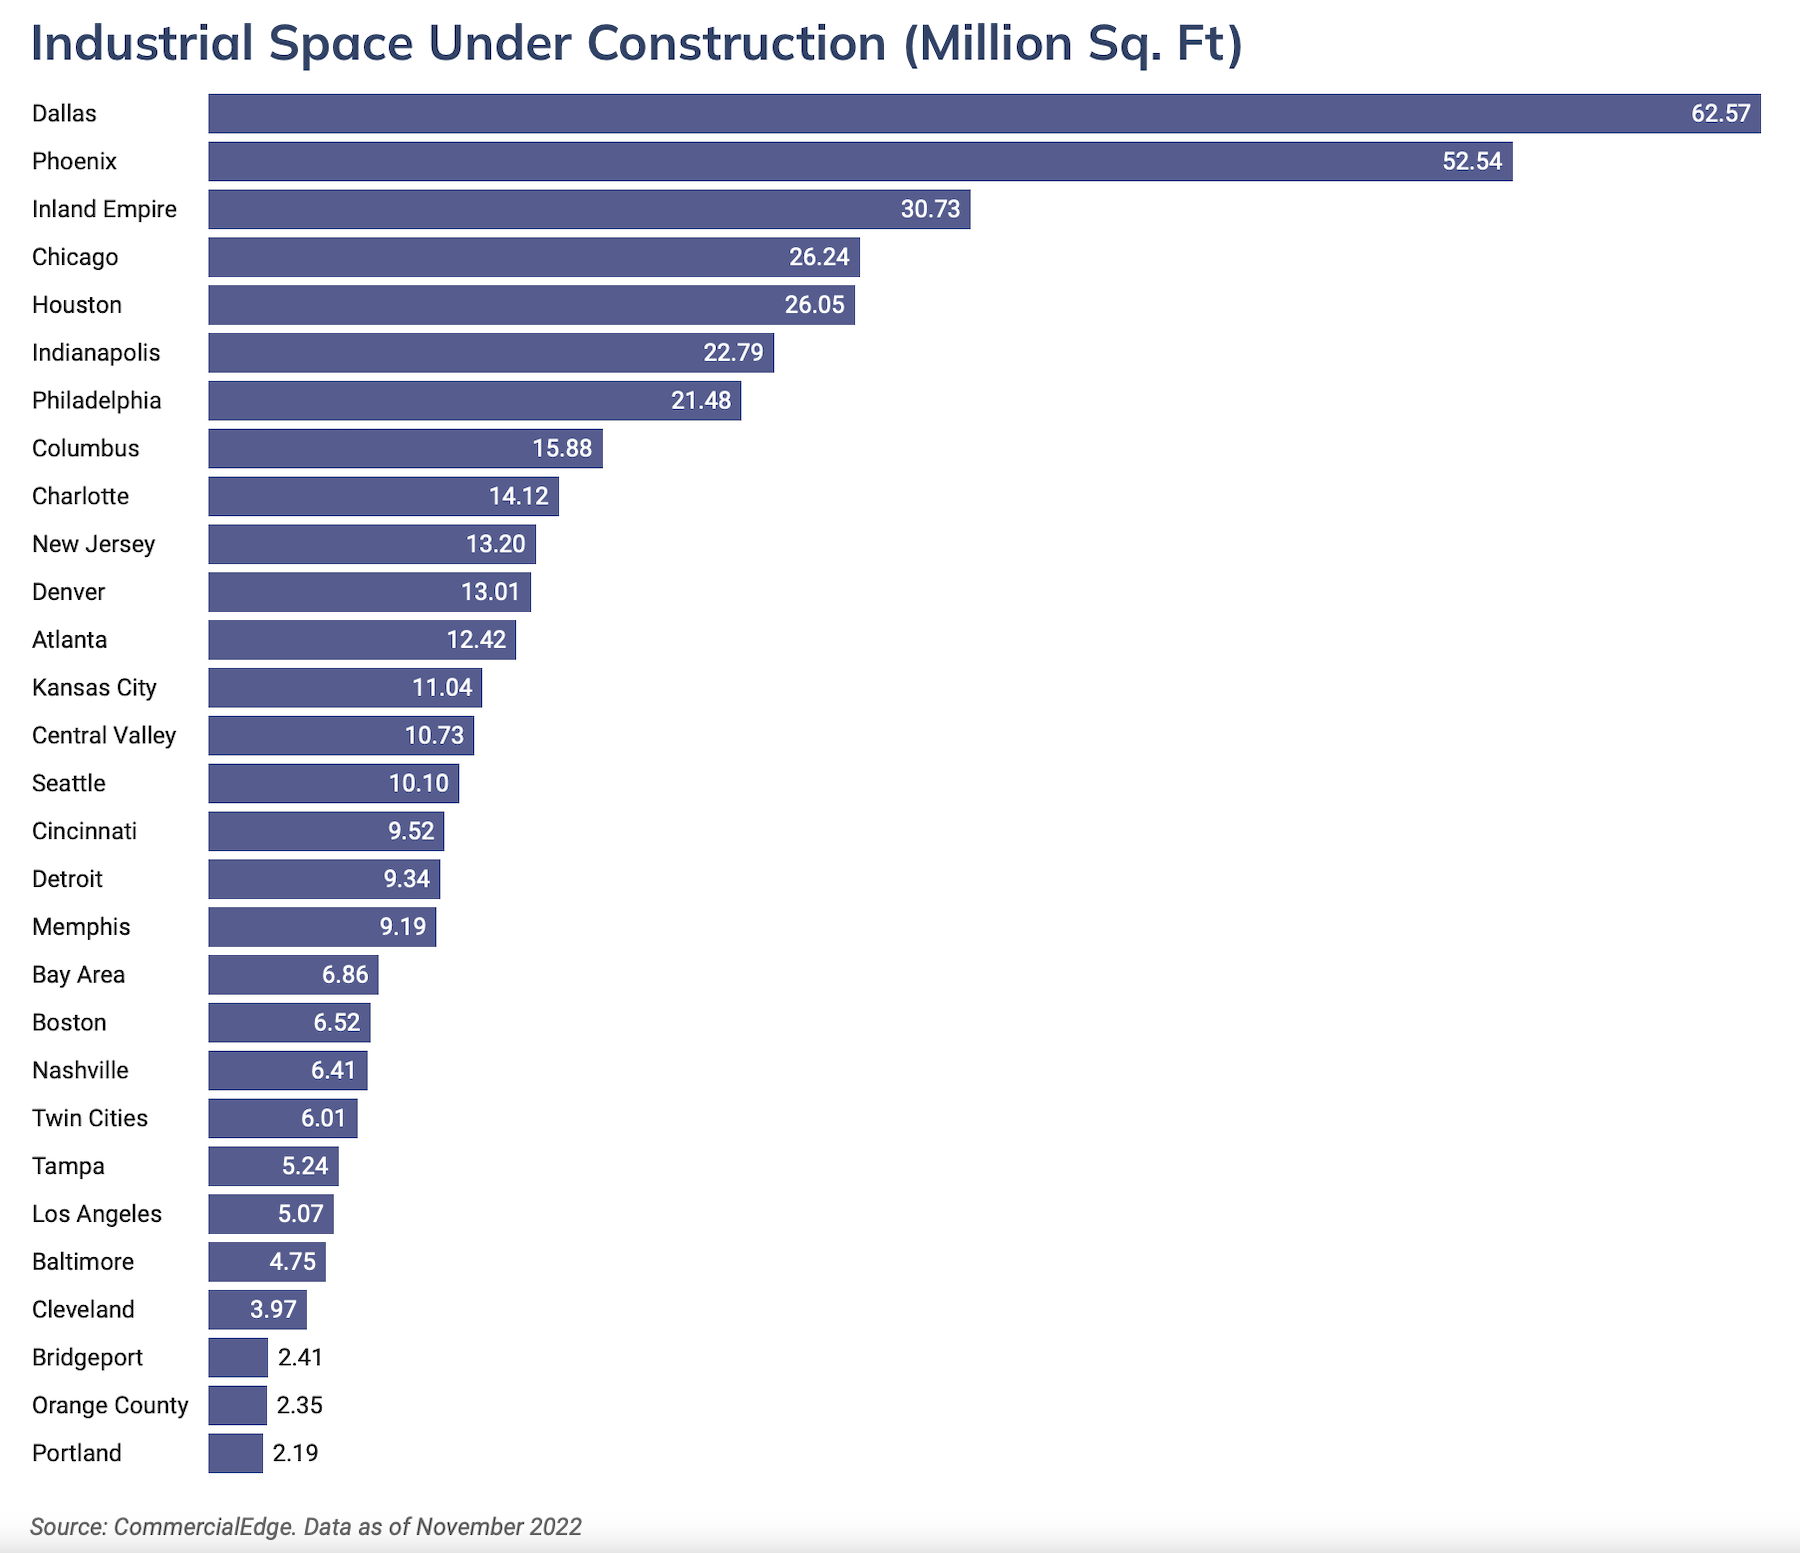 Commercial Edge's ranking of top industrial construction markets